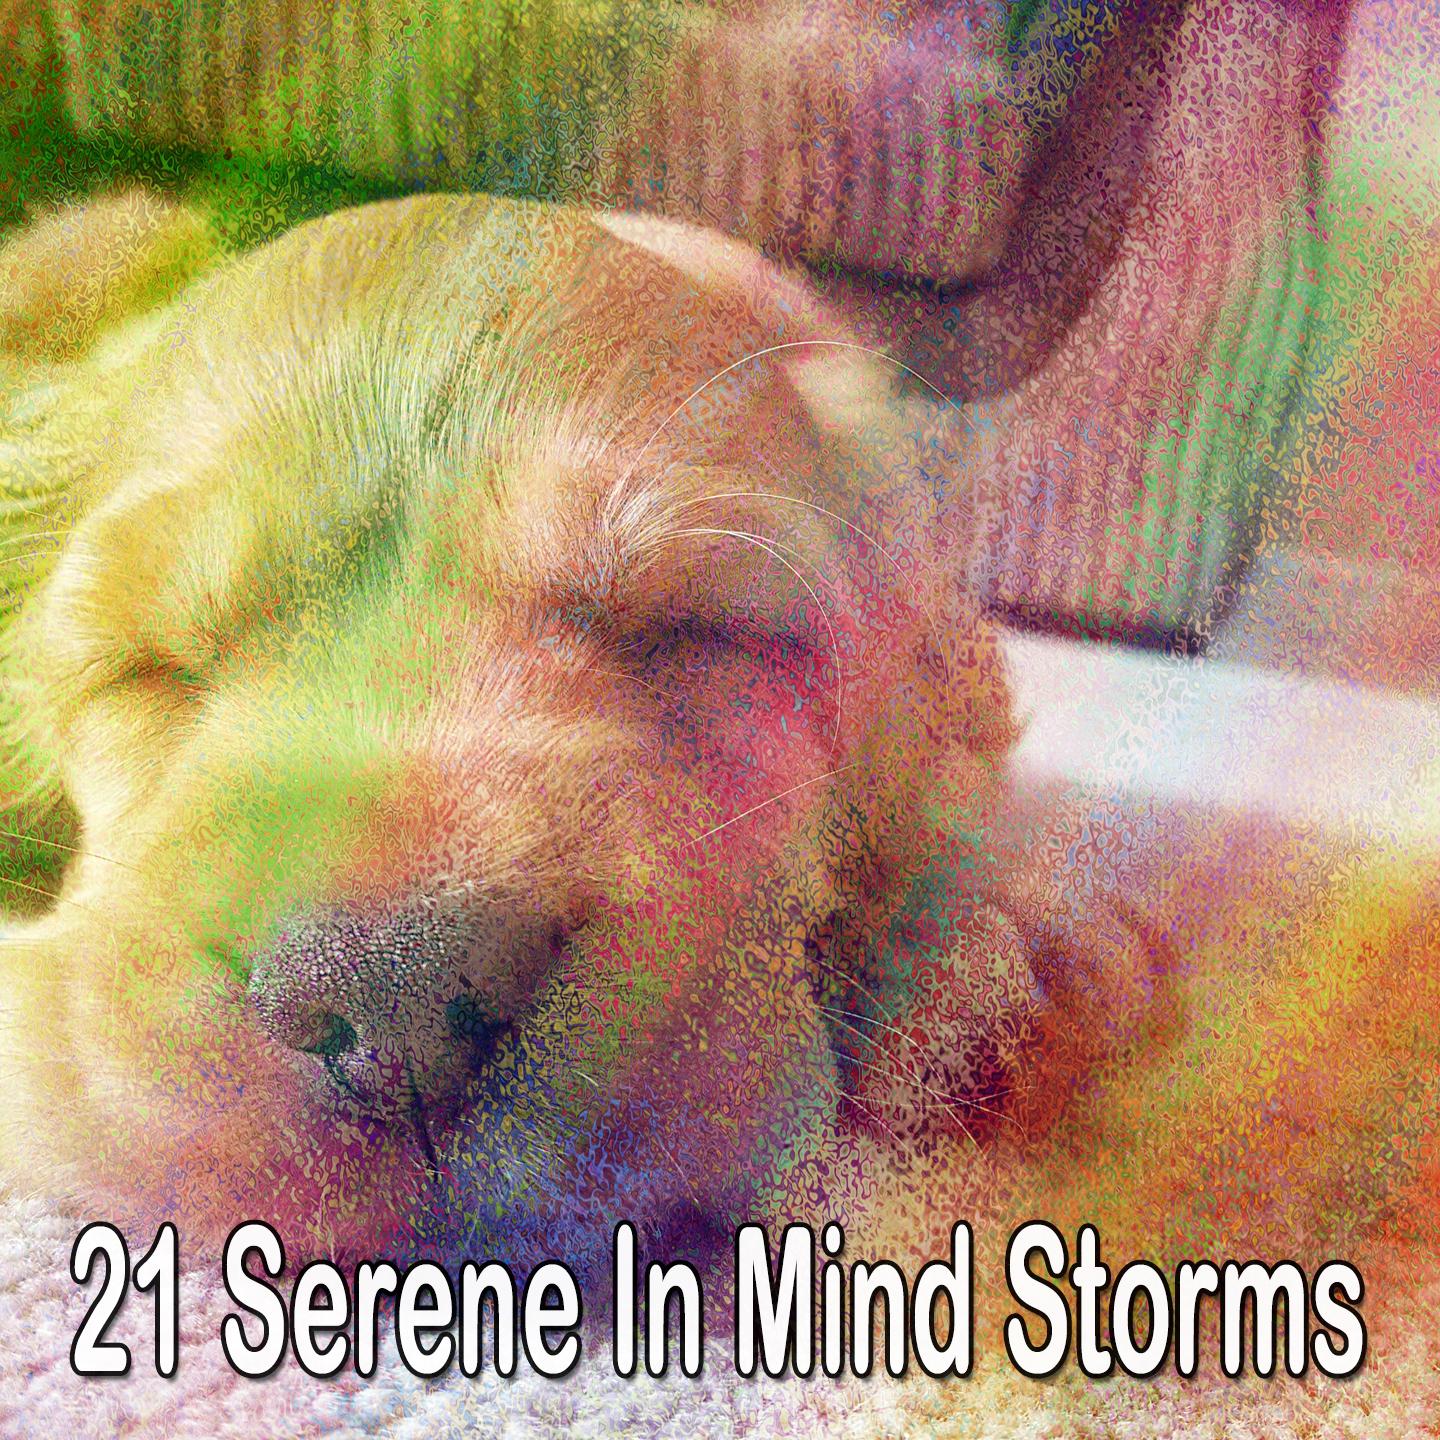 21 Serene in Mind Storms